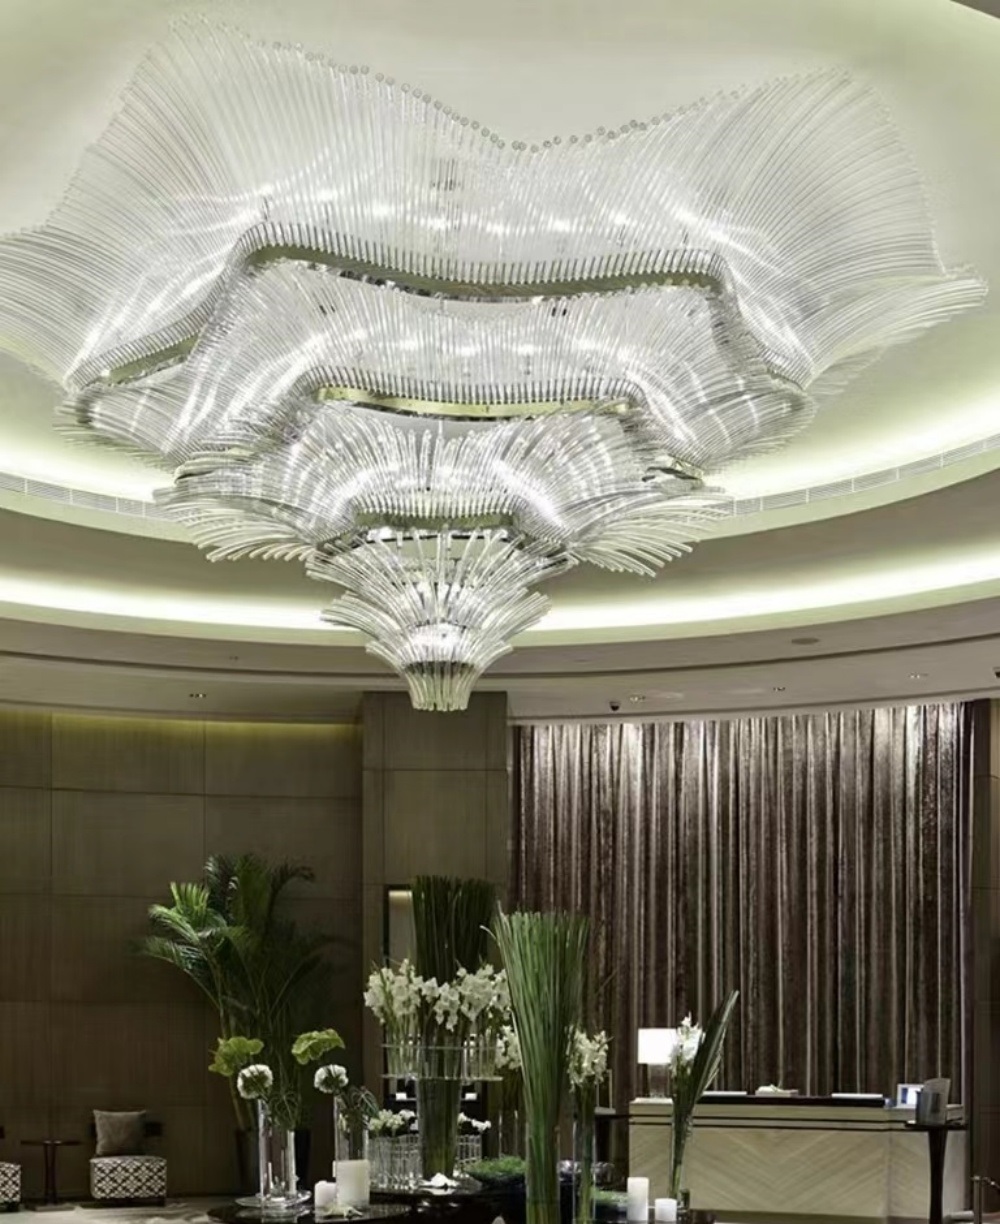 DUTTI LED Large Glass Pipe Chandelier: Modern Unique Design Pendant Ceiling Lighting OEM/ODM for Hotel Hall and Ballroom